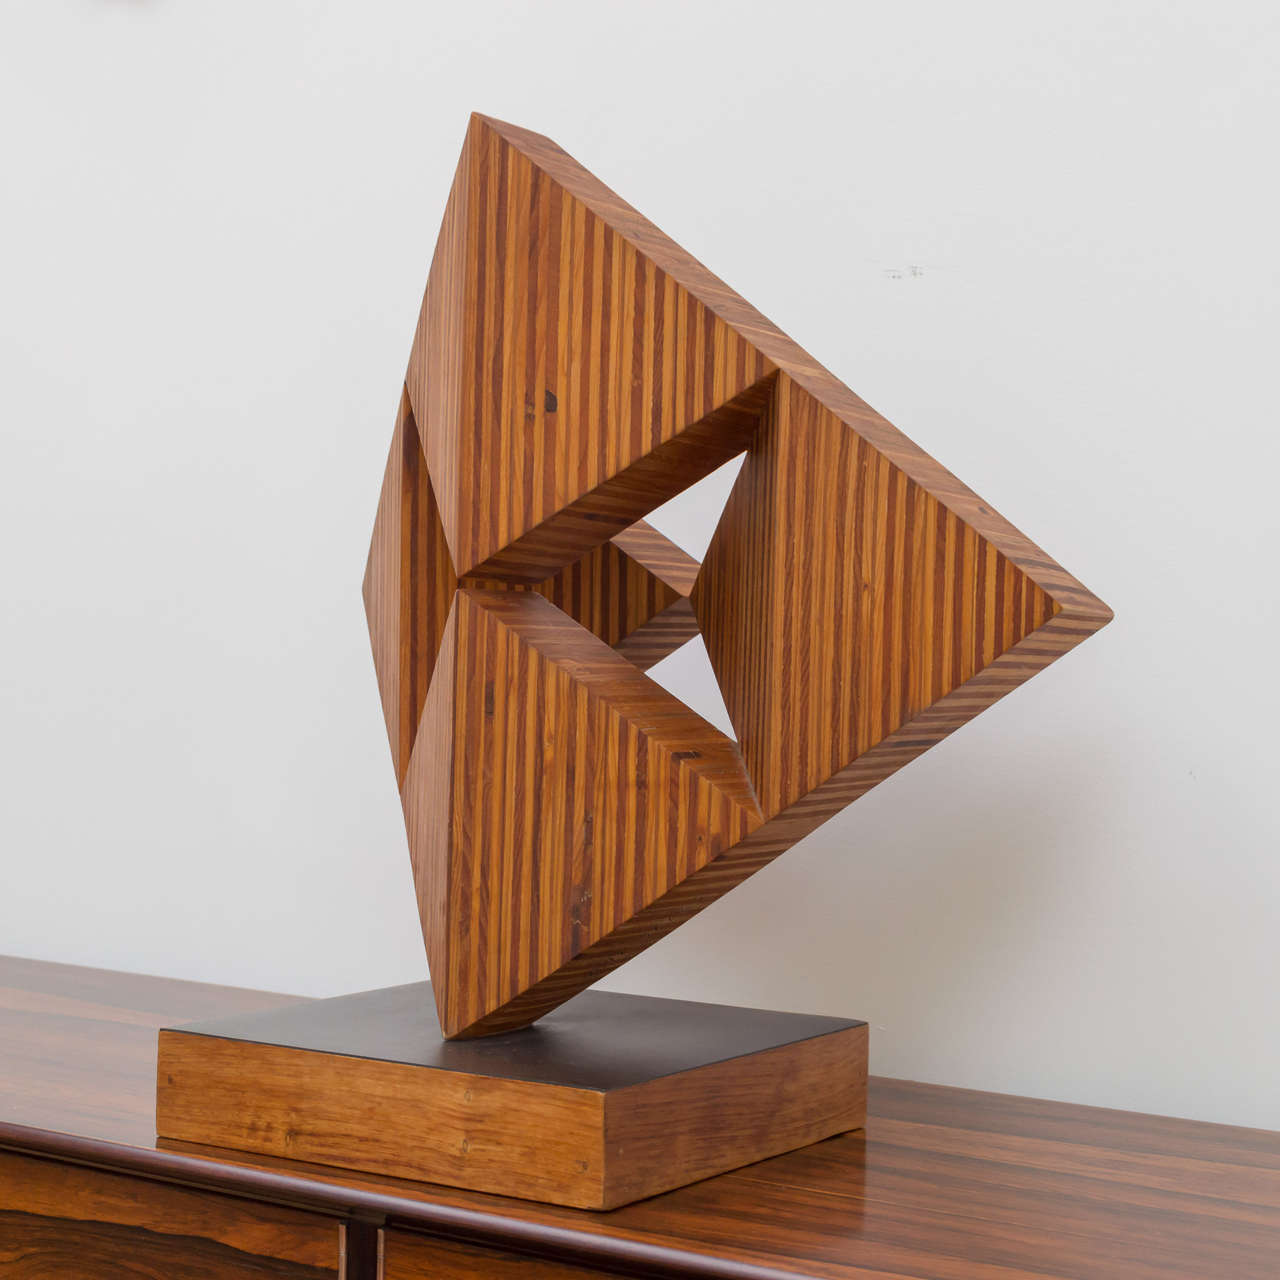 American Ray Sells Wood Sculpture